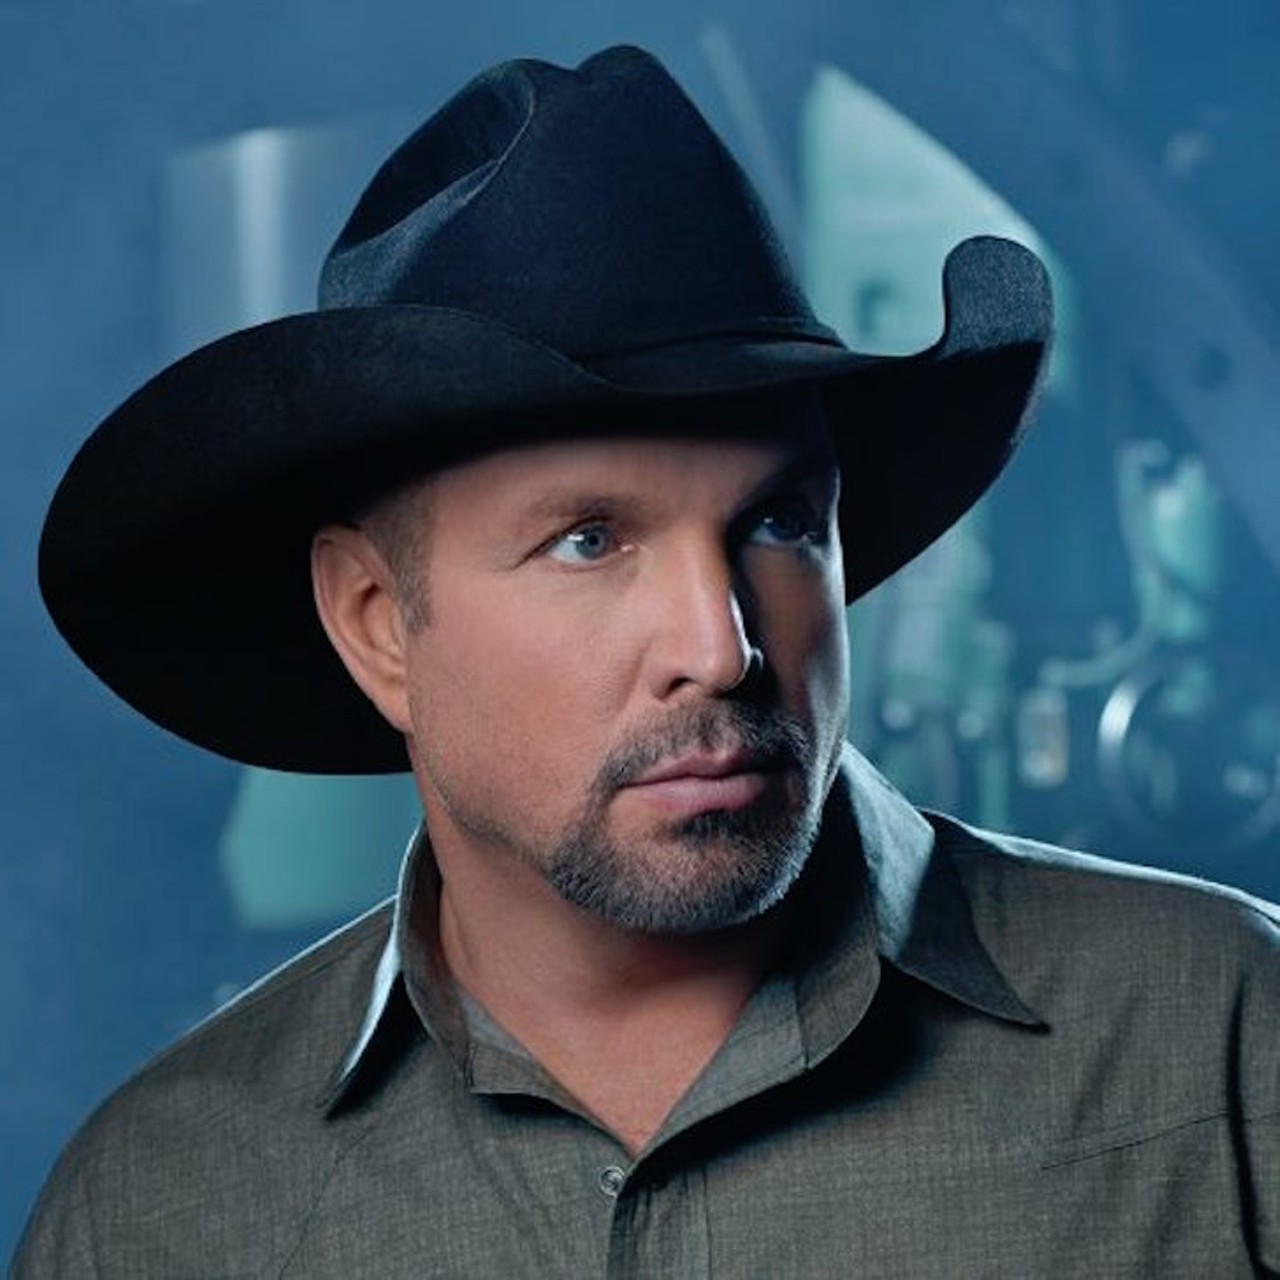 Garth Brooks at Amway Center
Oct. 6-9, 400 W Church St, 407-440-7000
Garth Brooks and Trisha Yearwood come to Amway for four - yes four - nights in a row. If you miss this show, there&#146;s only one person to blame.
Photo via Garth Brooks/Facebook